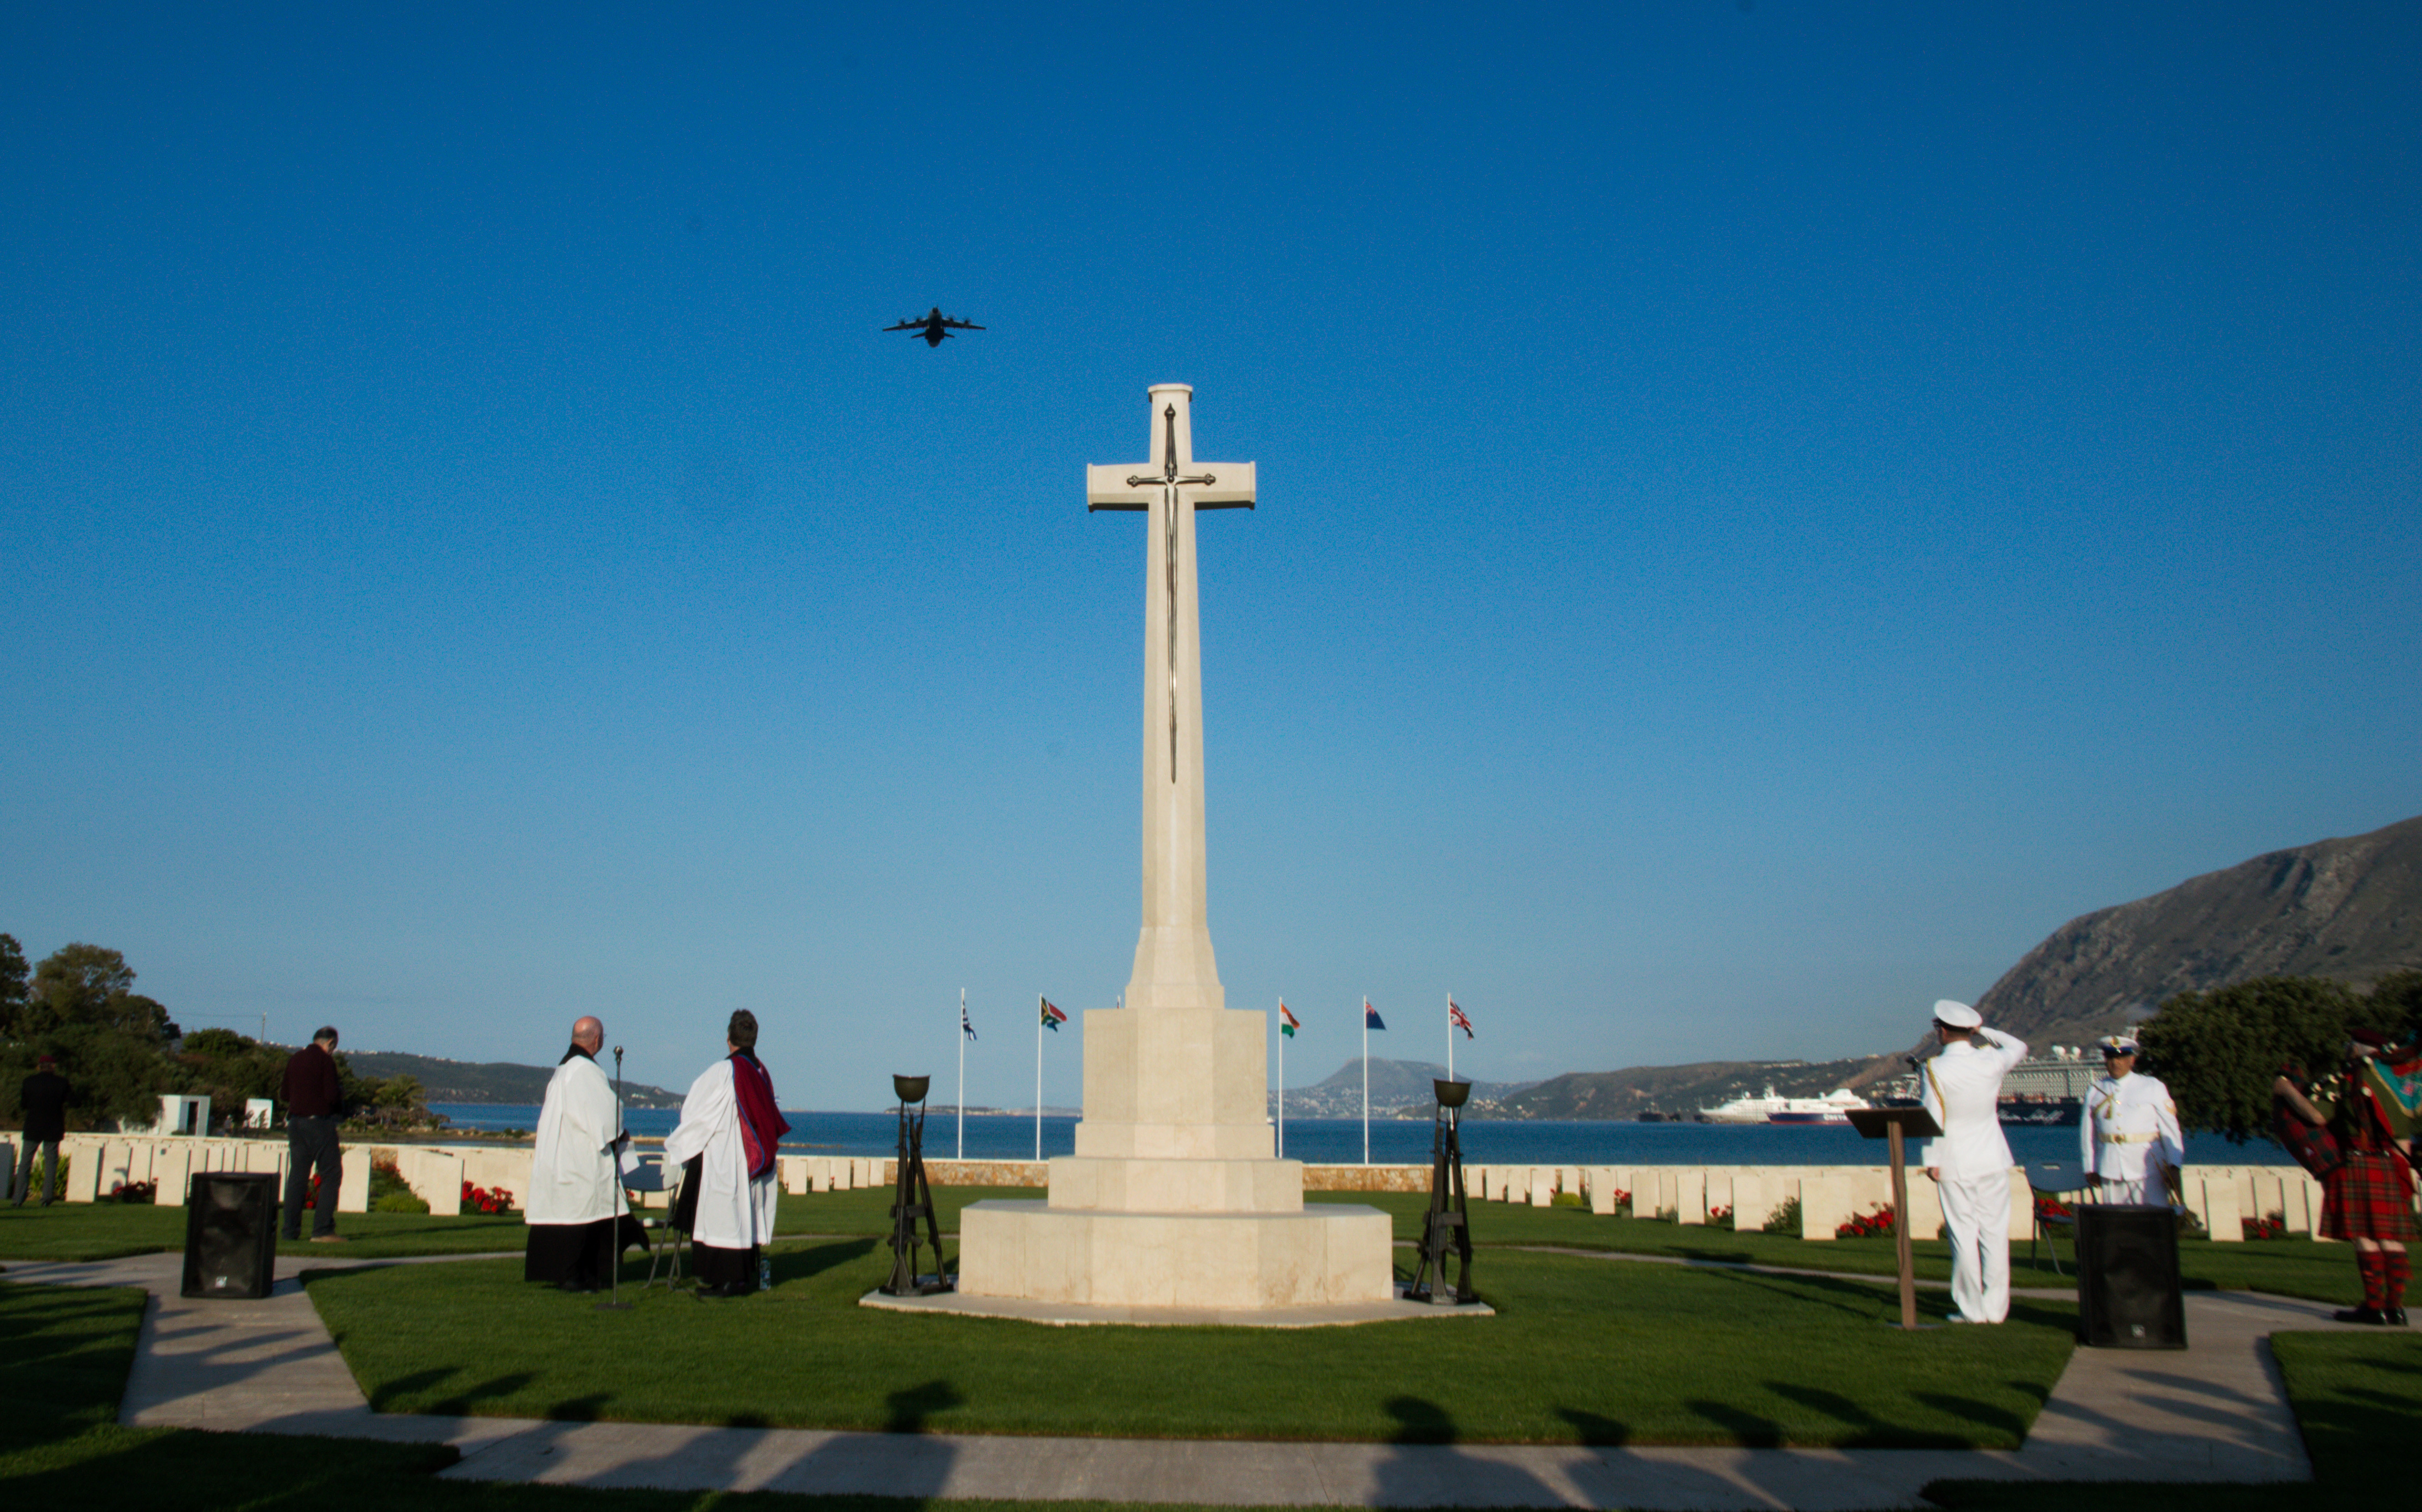 Personnel stand by memorial with flypast.